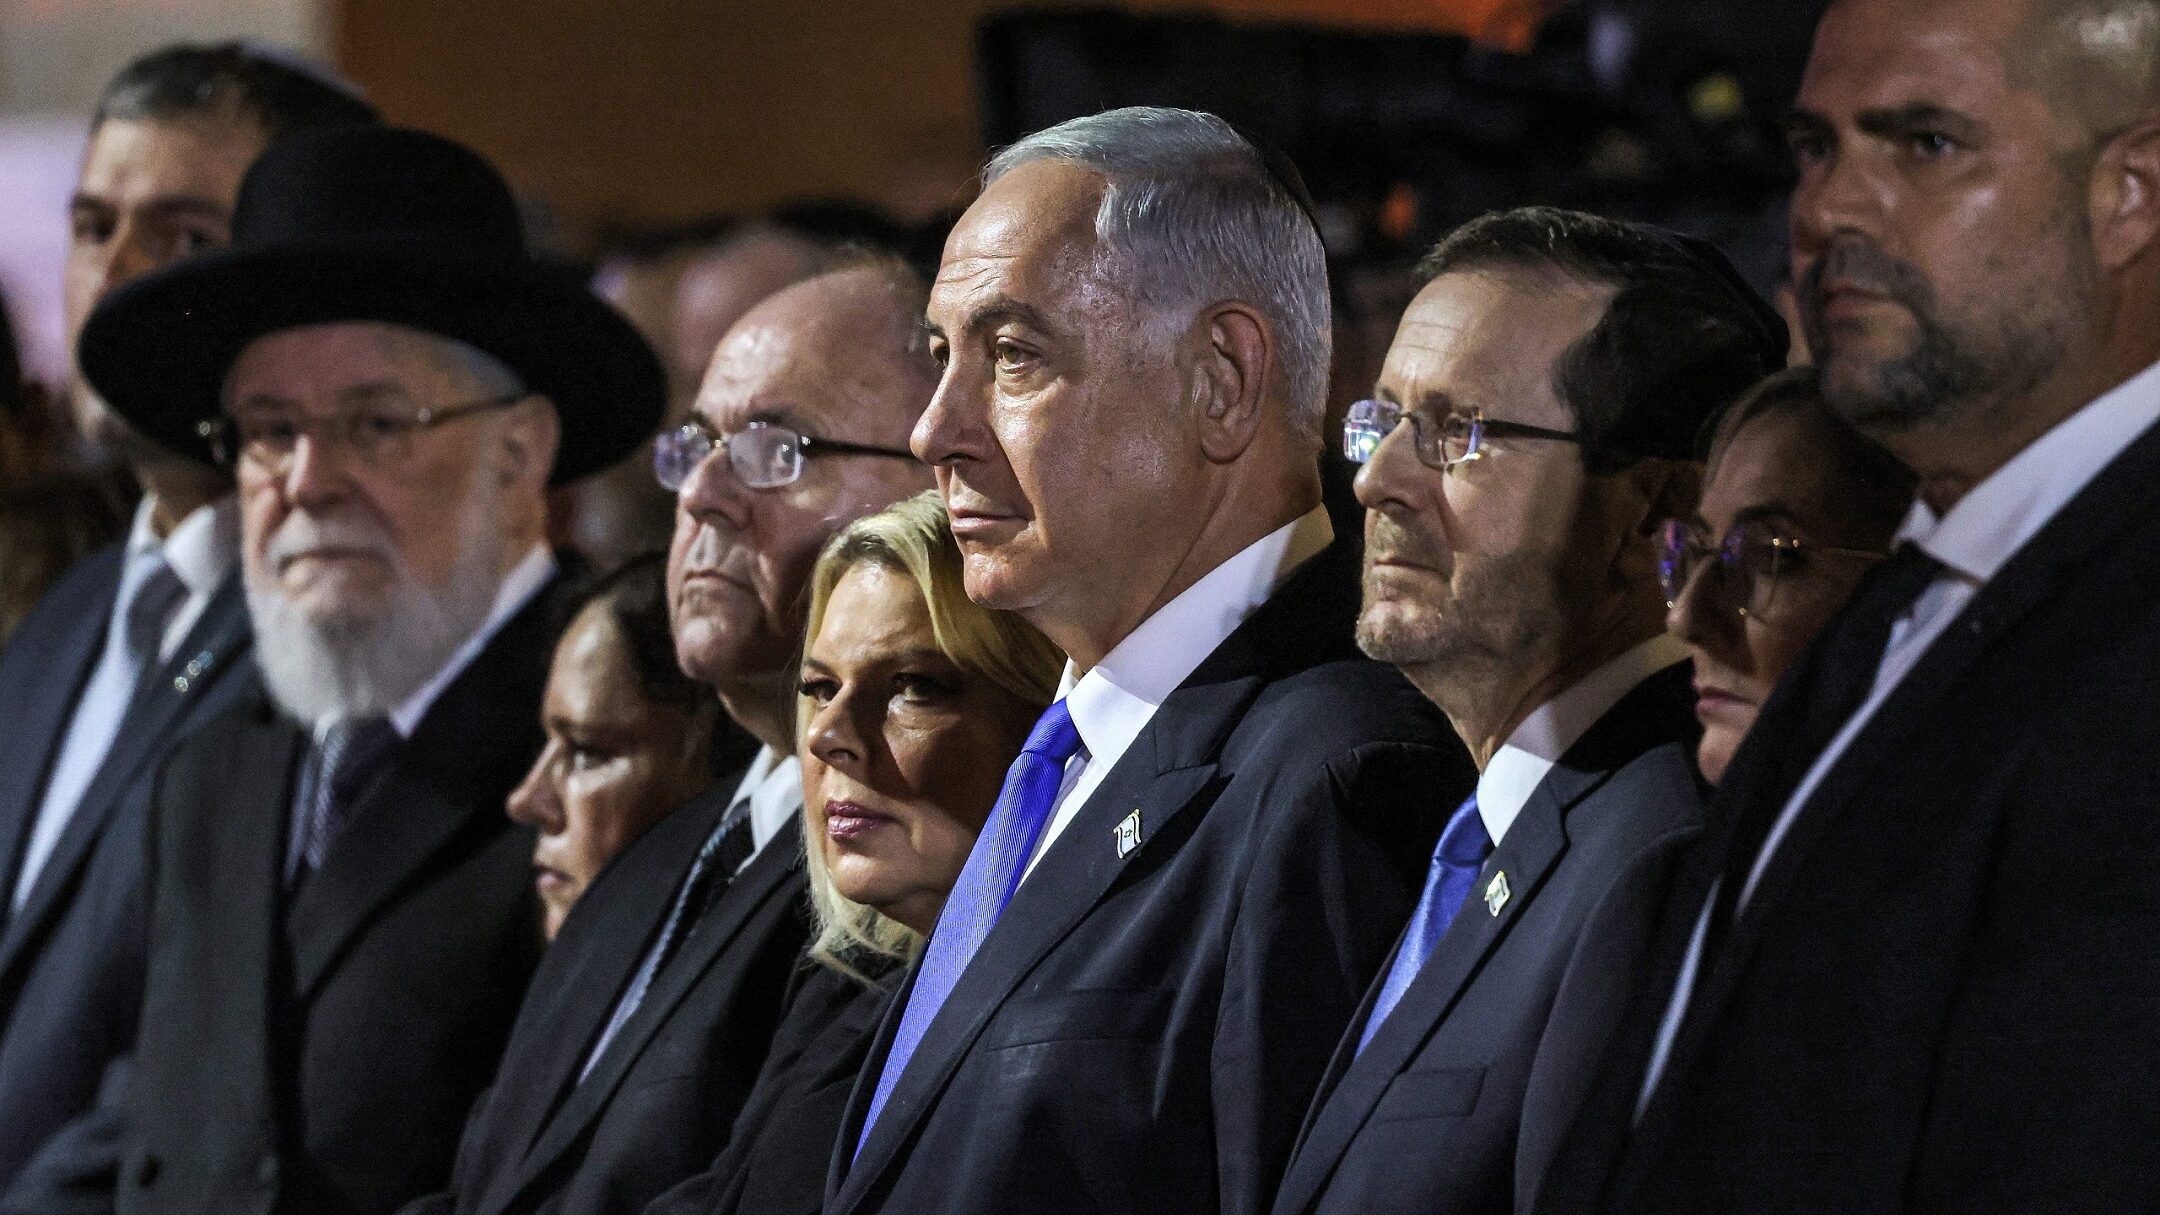 Israel Honors Holocaust Victims With Nationwide Moment of Silence